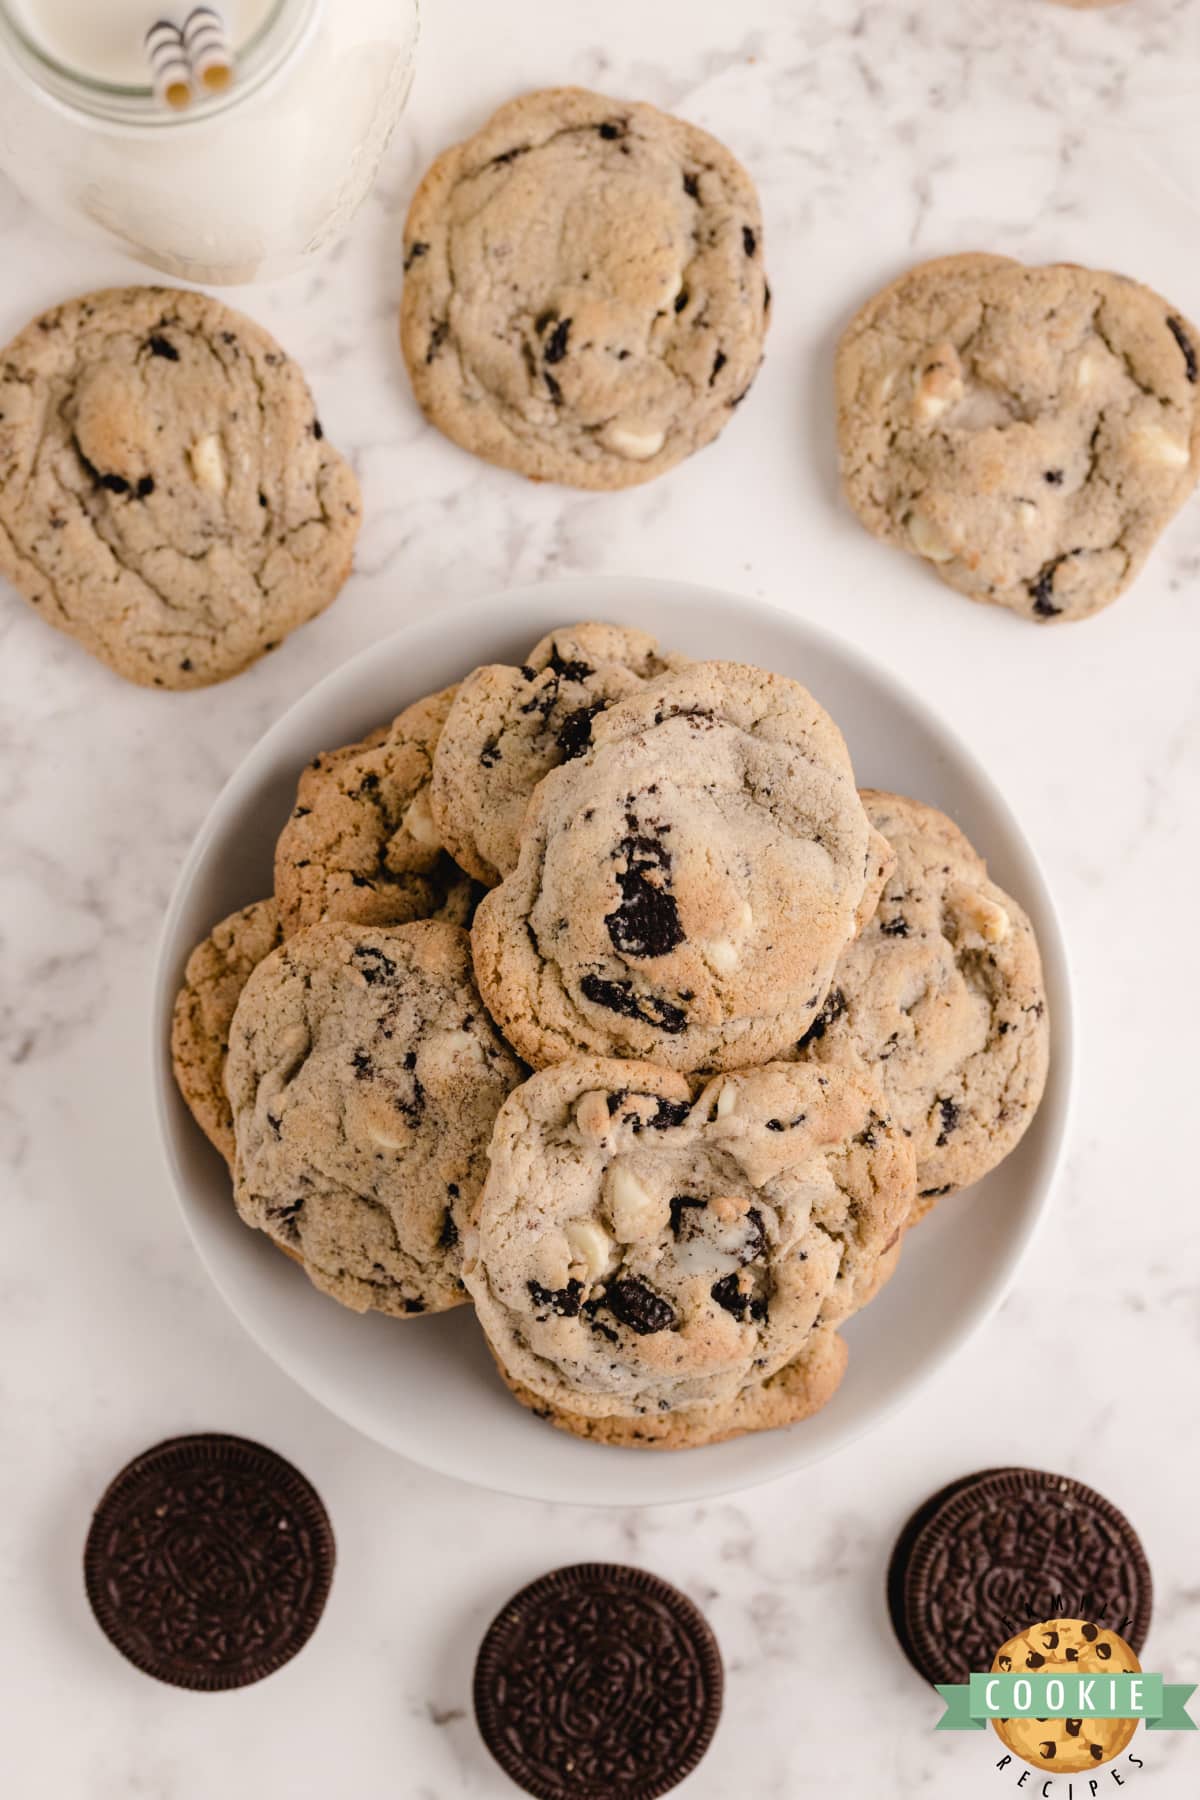 Cookies & Cream Cookies are made with Oreo pudding mix and crushed Oreo cookies. A deliciously soft and chewy cookie recipe that is sure to be a favorite!